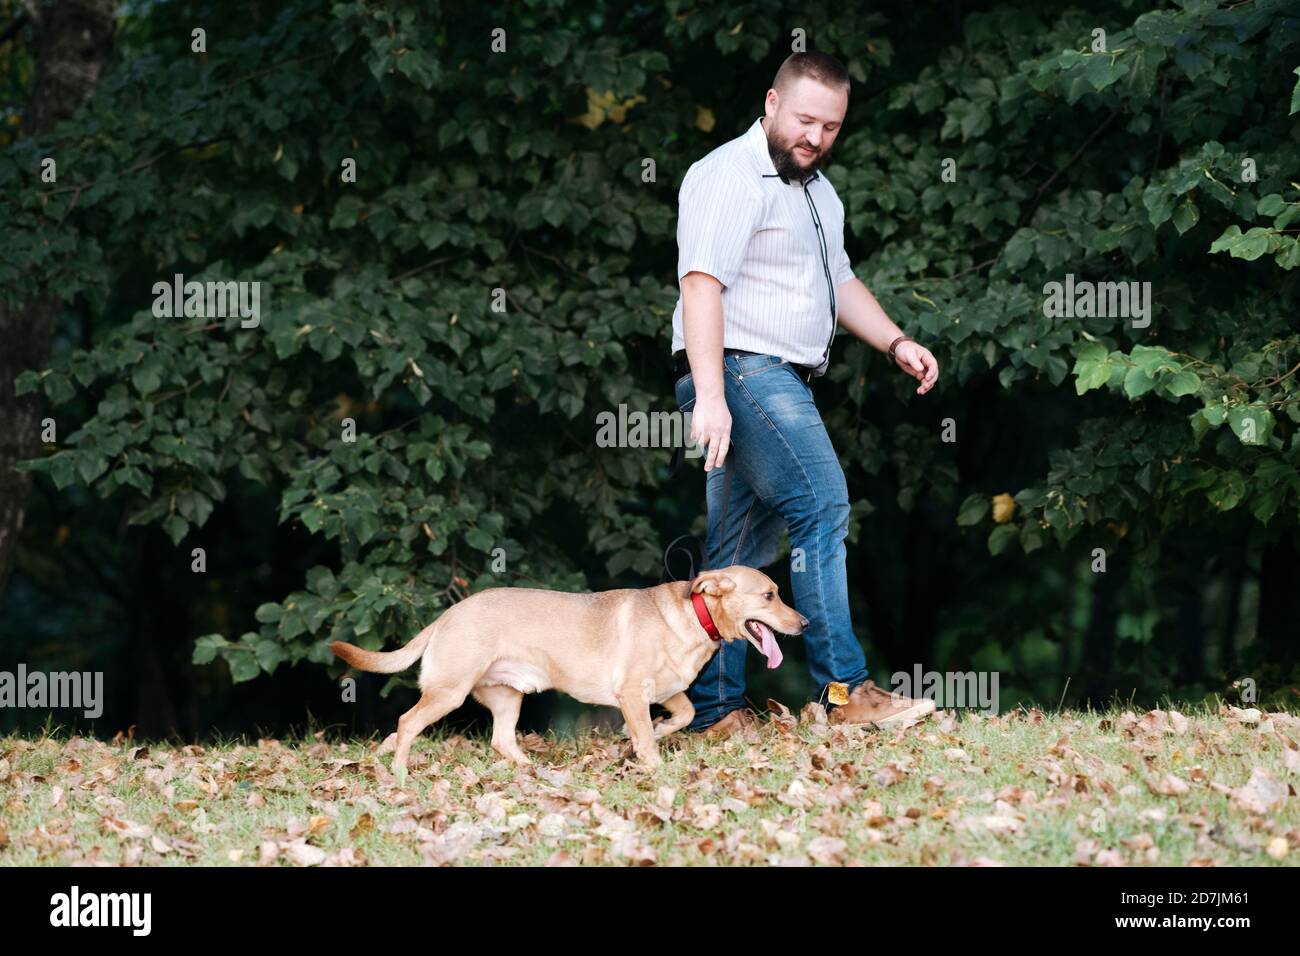 Man spending leisure time while walking with dog in park Stock Photo